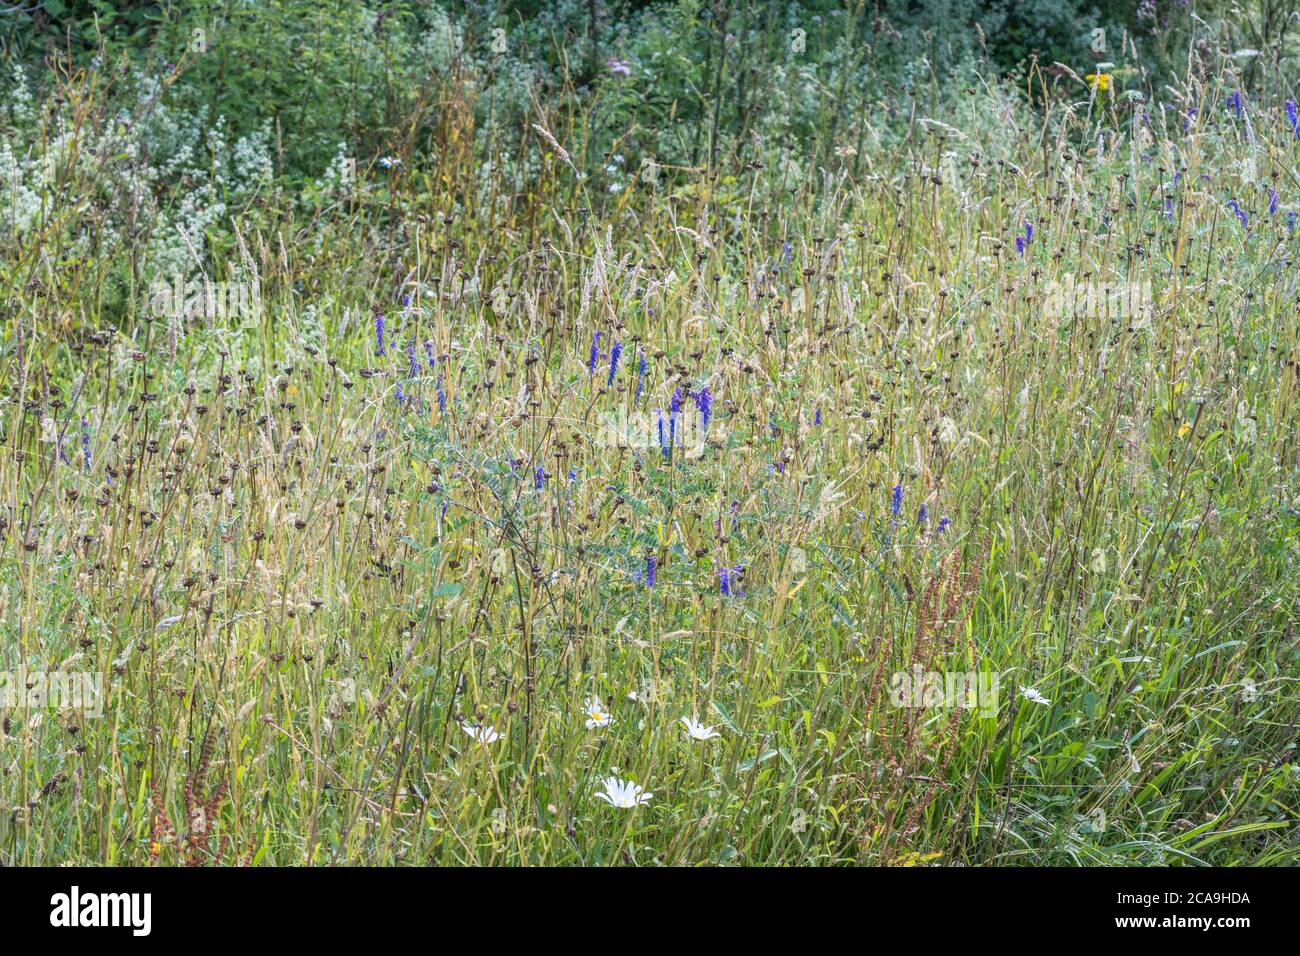 Wide variety of colourful UK roadside weeds in summer sunshine. For overtaken or overgrown by weeds, weeds out of control, Stock Photo